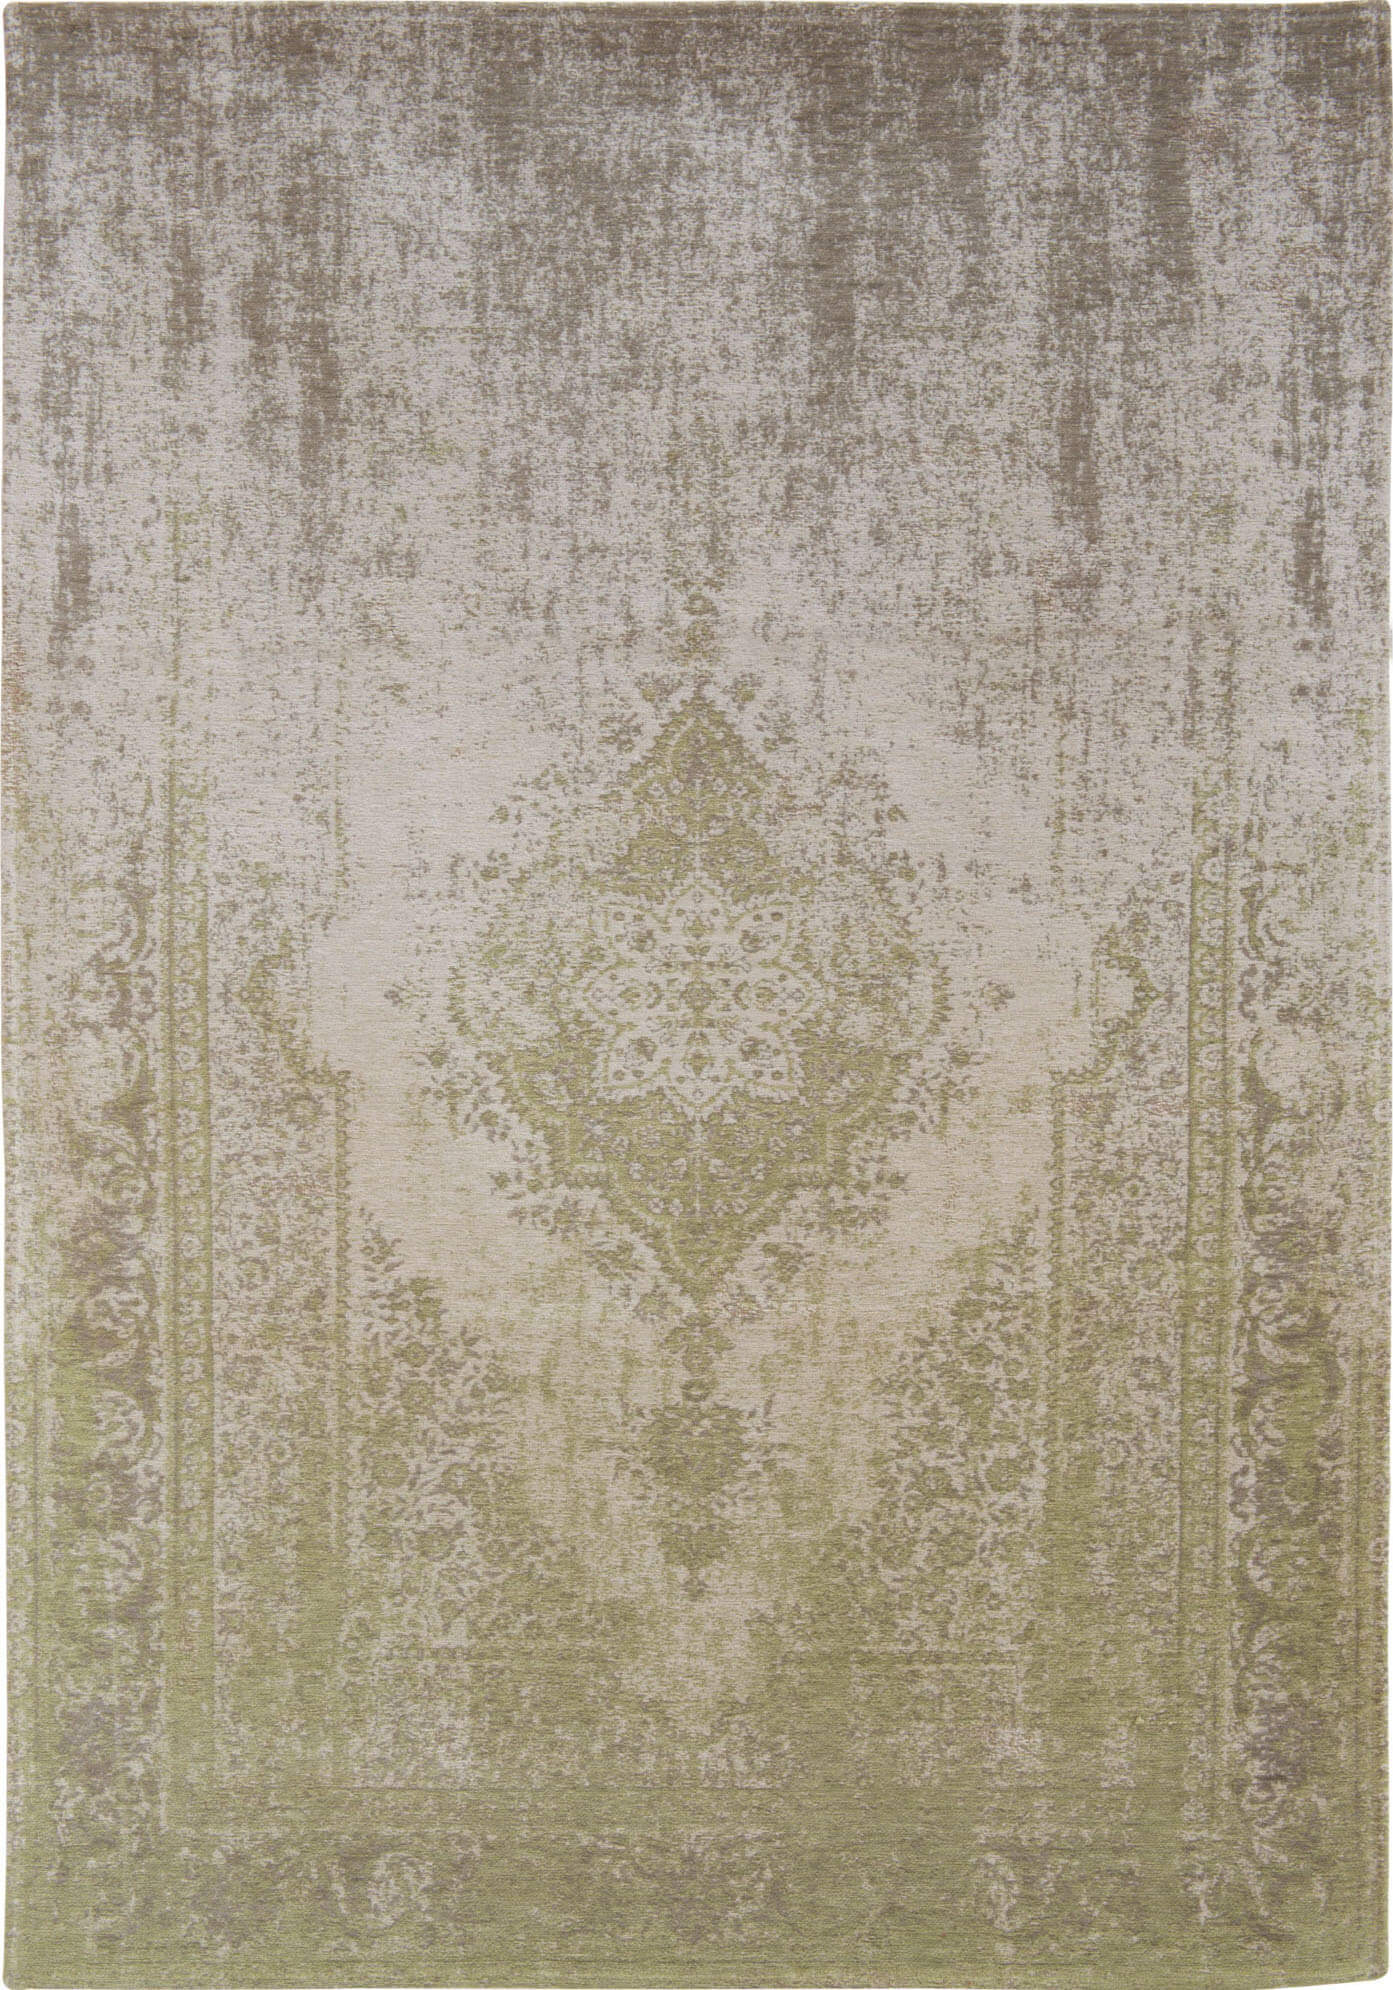 Persian Vintage Style Rug Pearl Cream ☞ Size: 200 x 280 cm